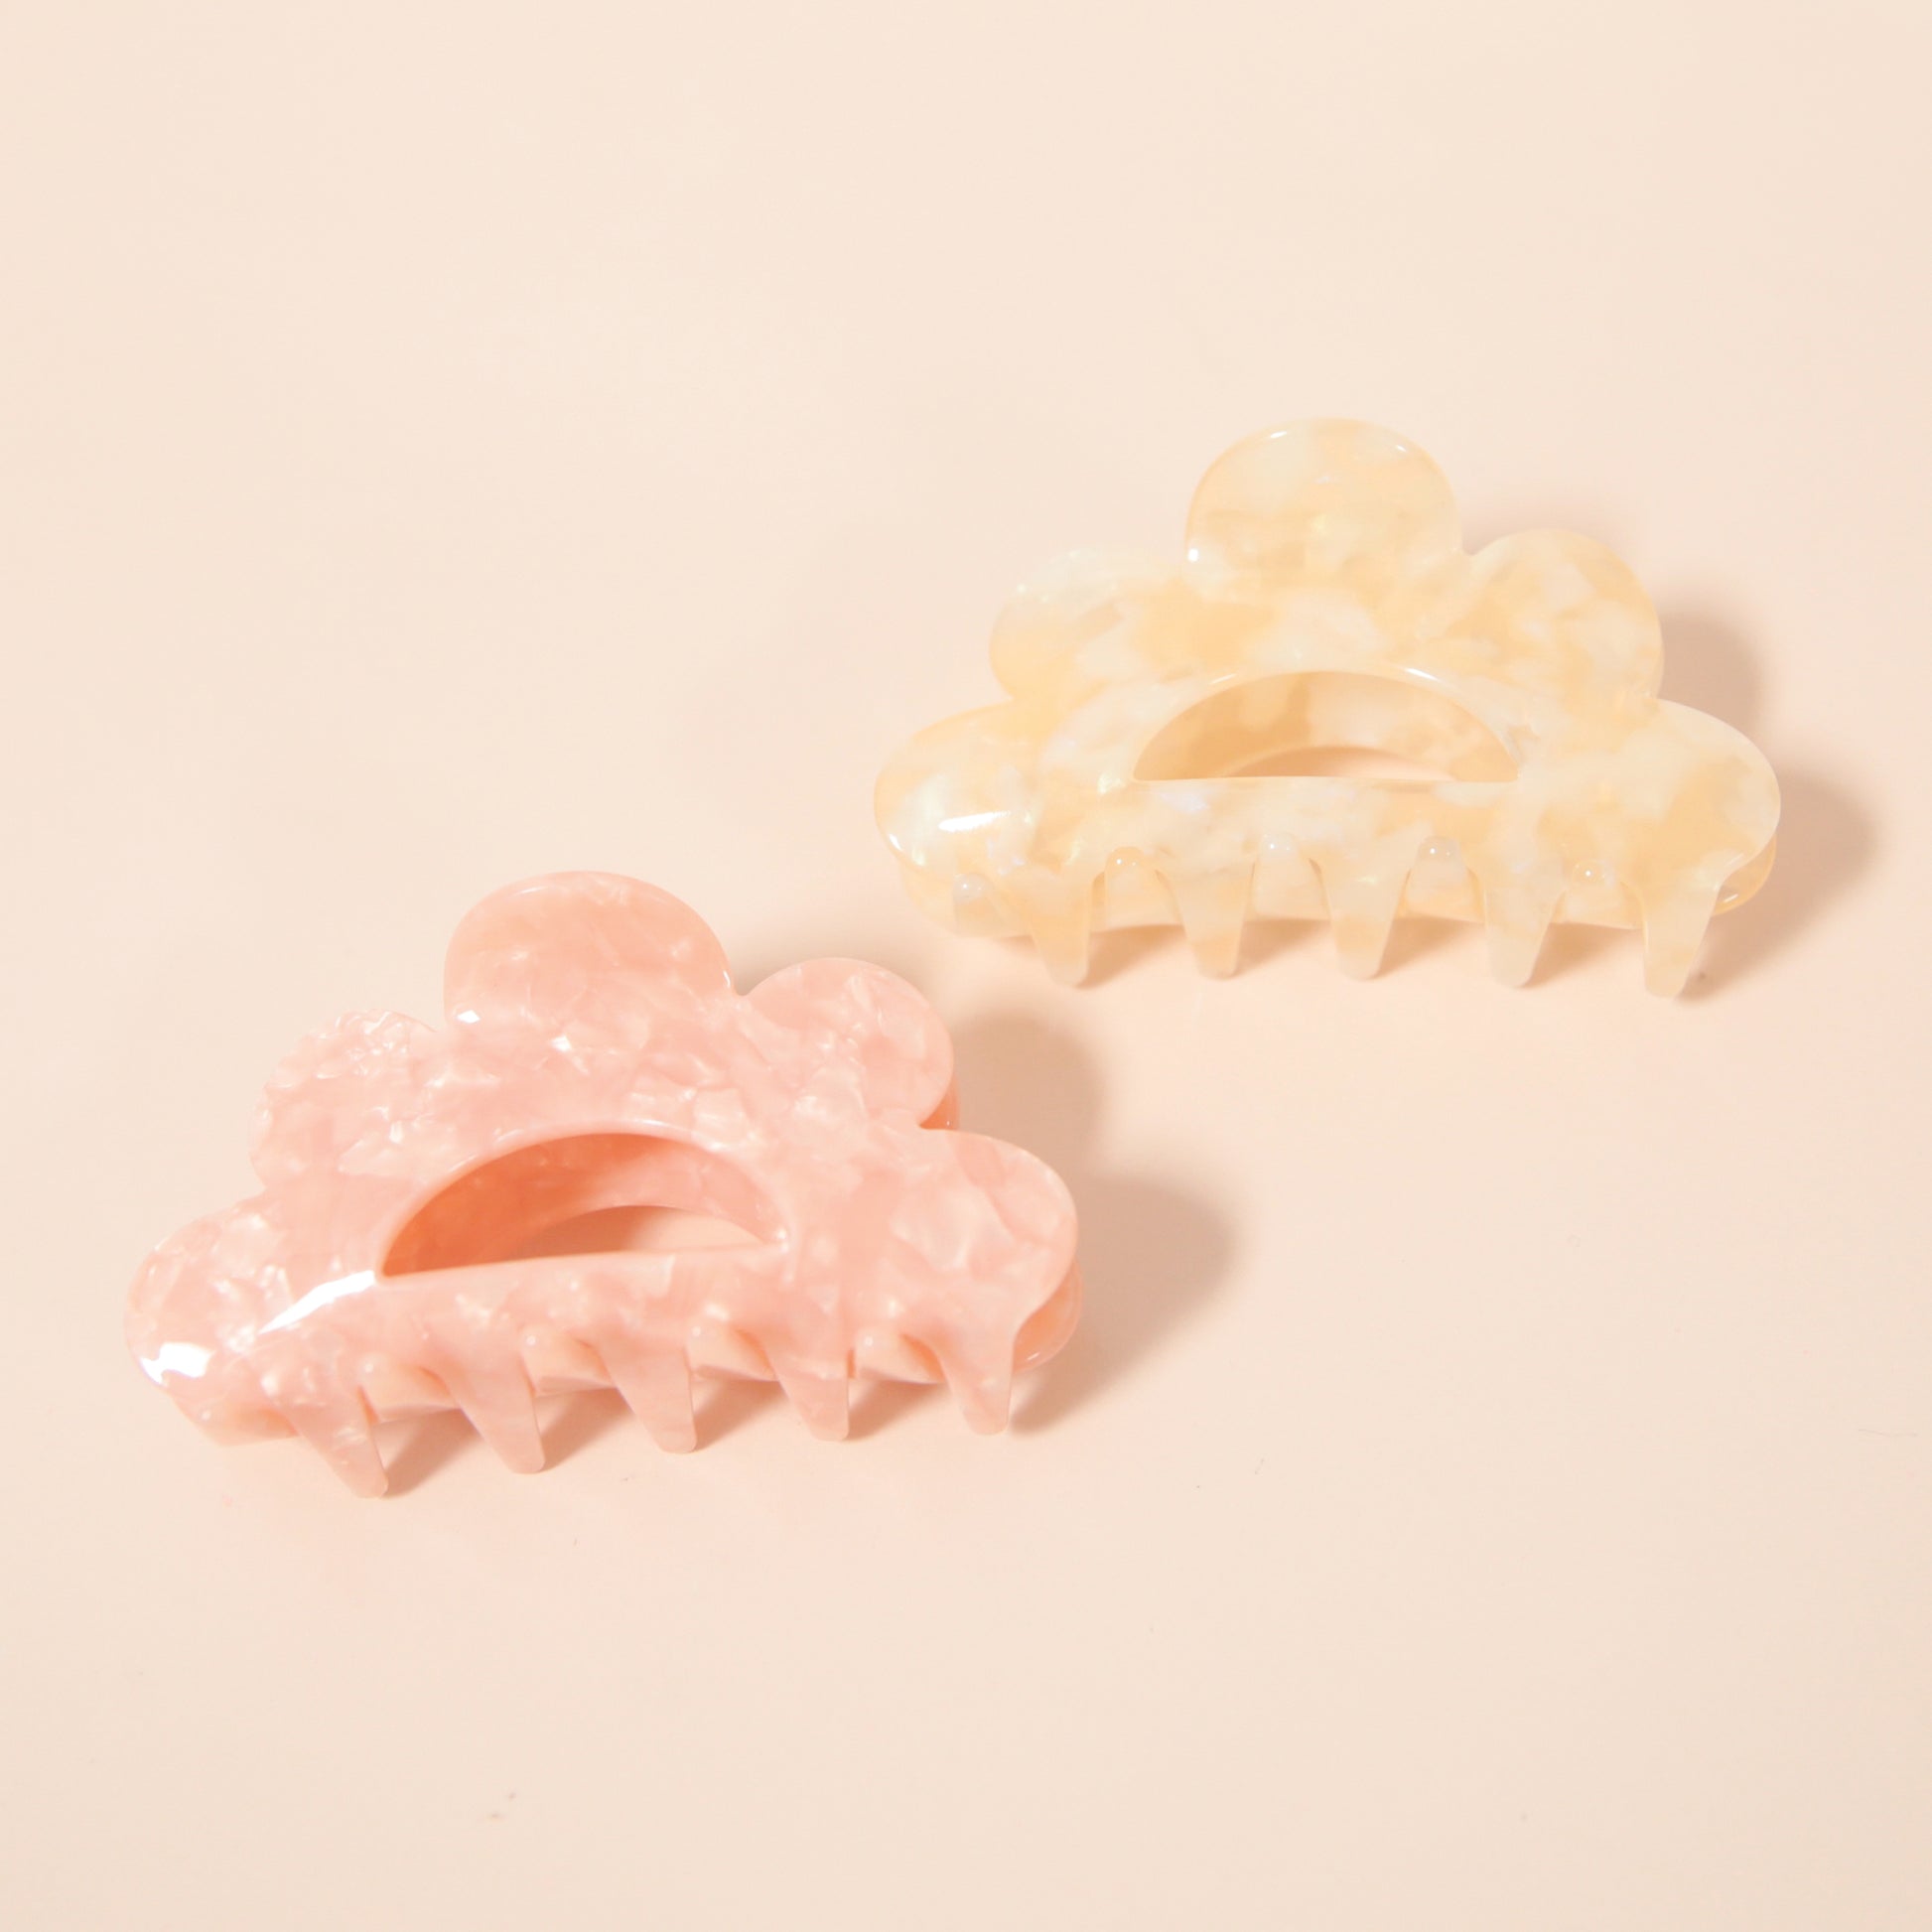 An ivory claw clip with a scalloped edge detail and an ivory and white color.